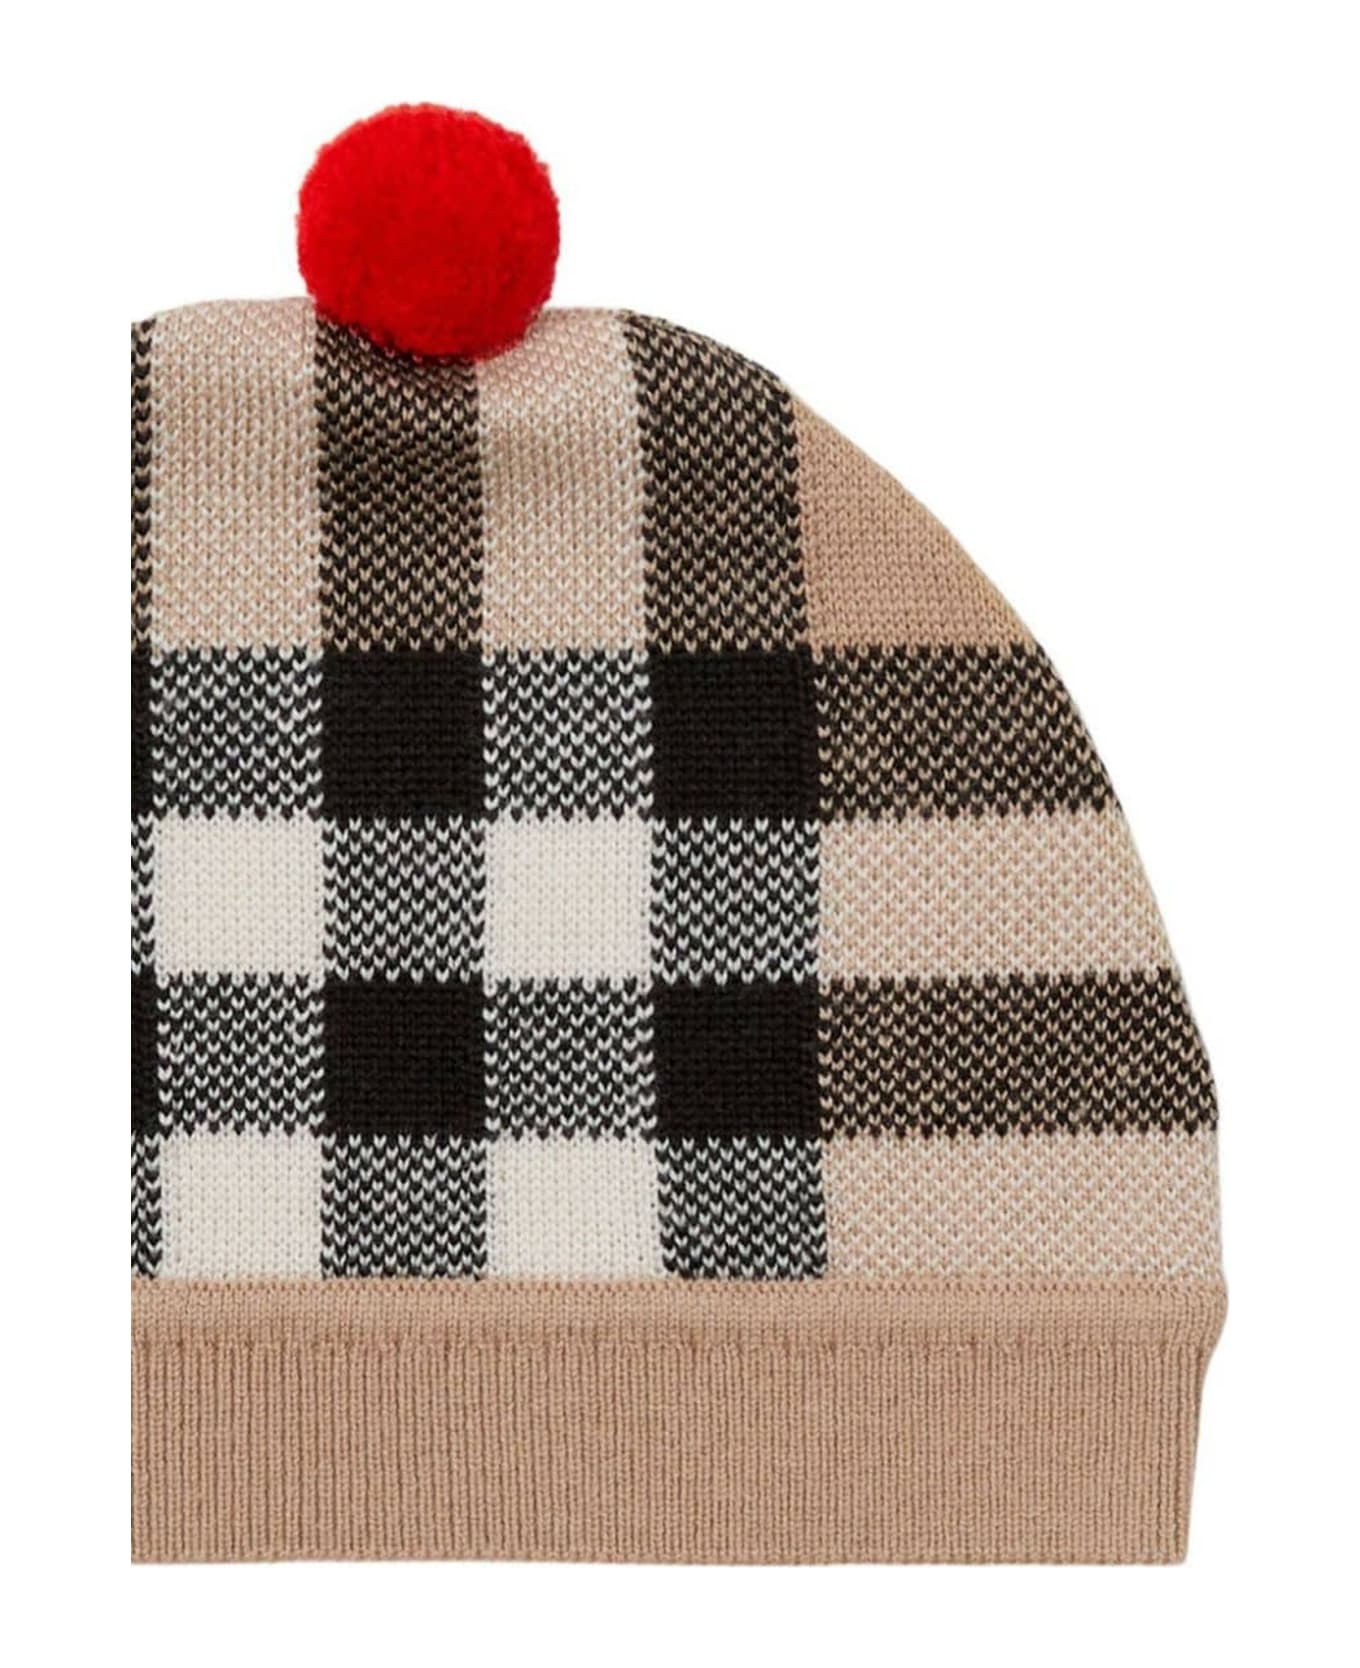 Burberry Check Wool Beanie - Archive Beige